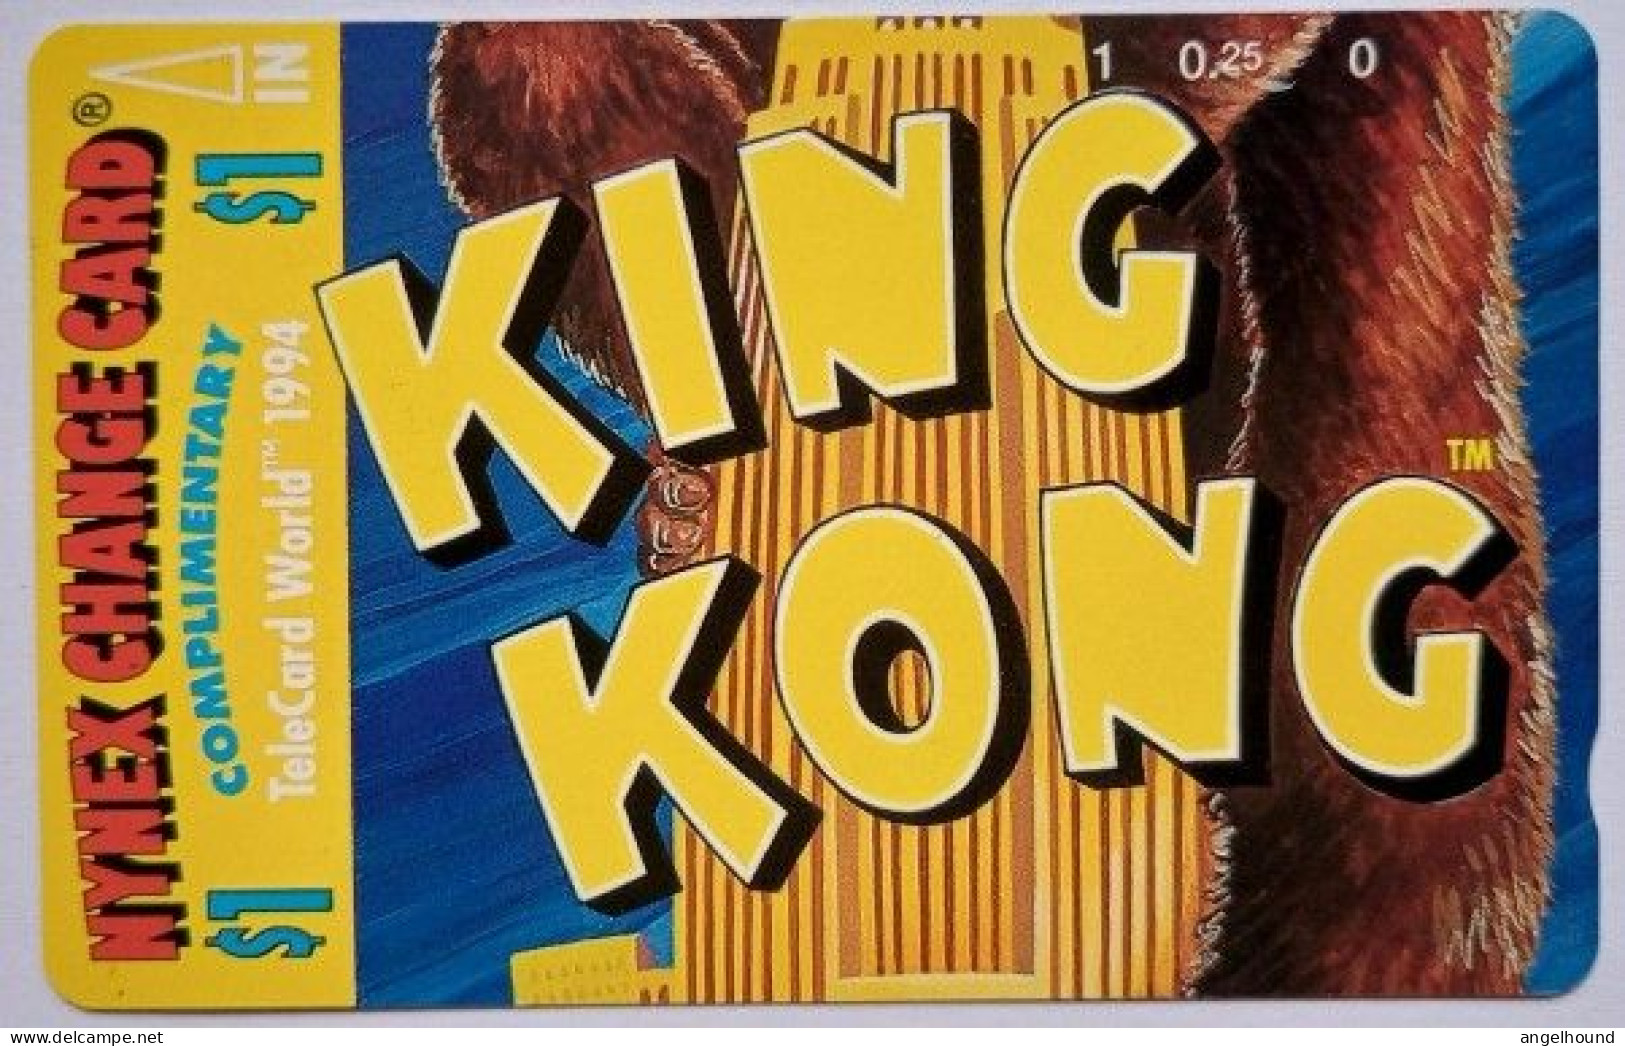 USA Nynex $1 MINT Tamura " King Kpng Puzzle  2/3 " - [3] Magnetic Cards